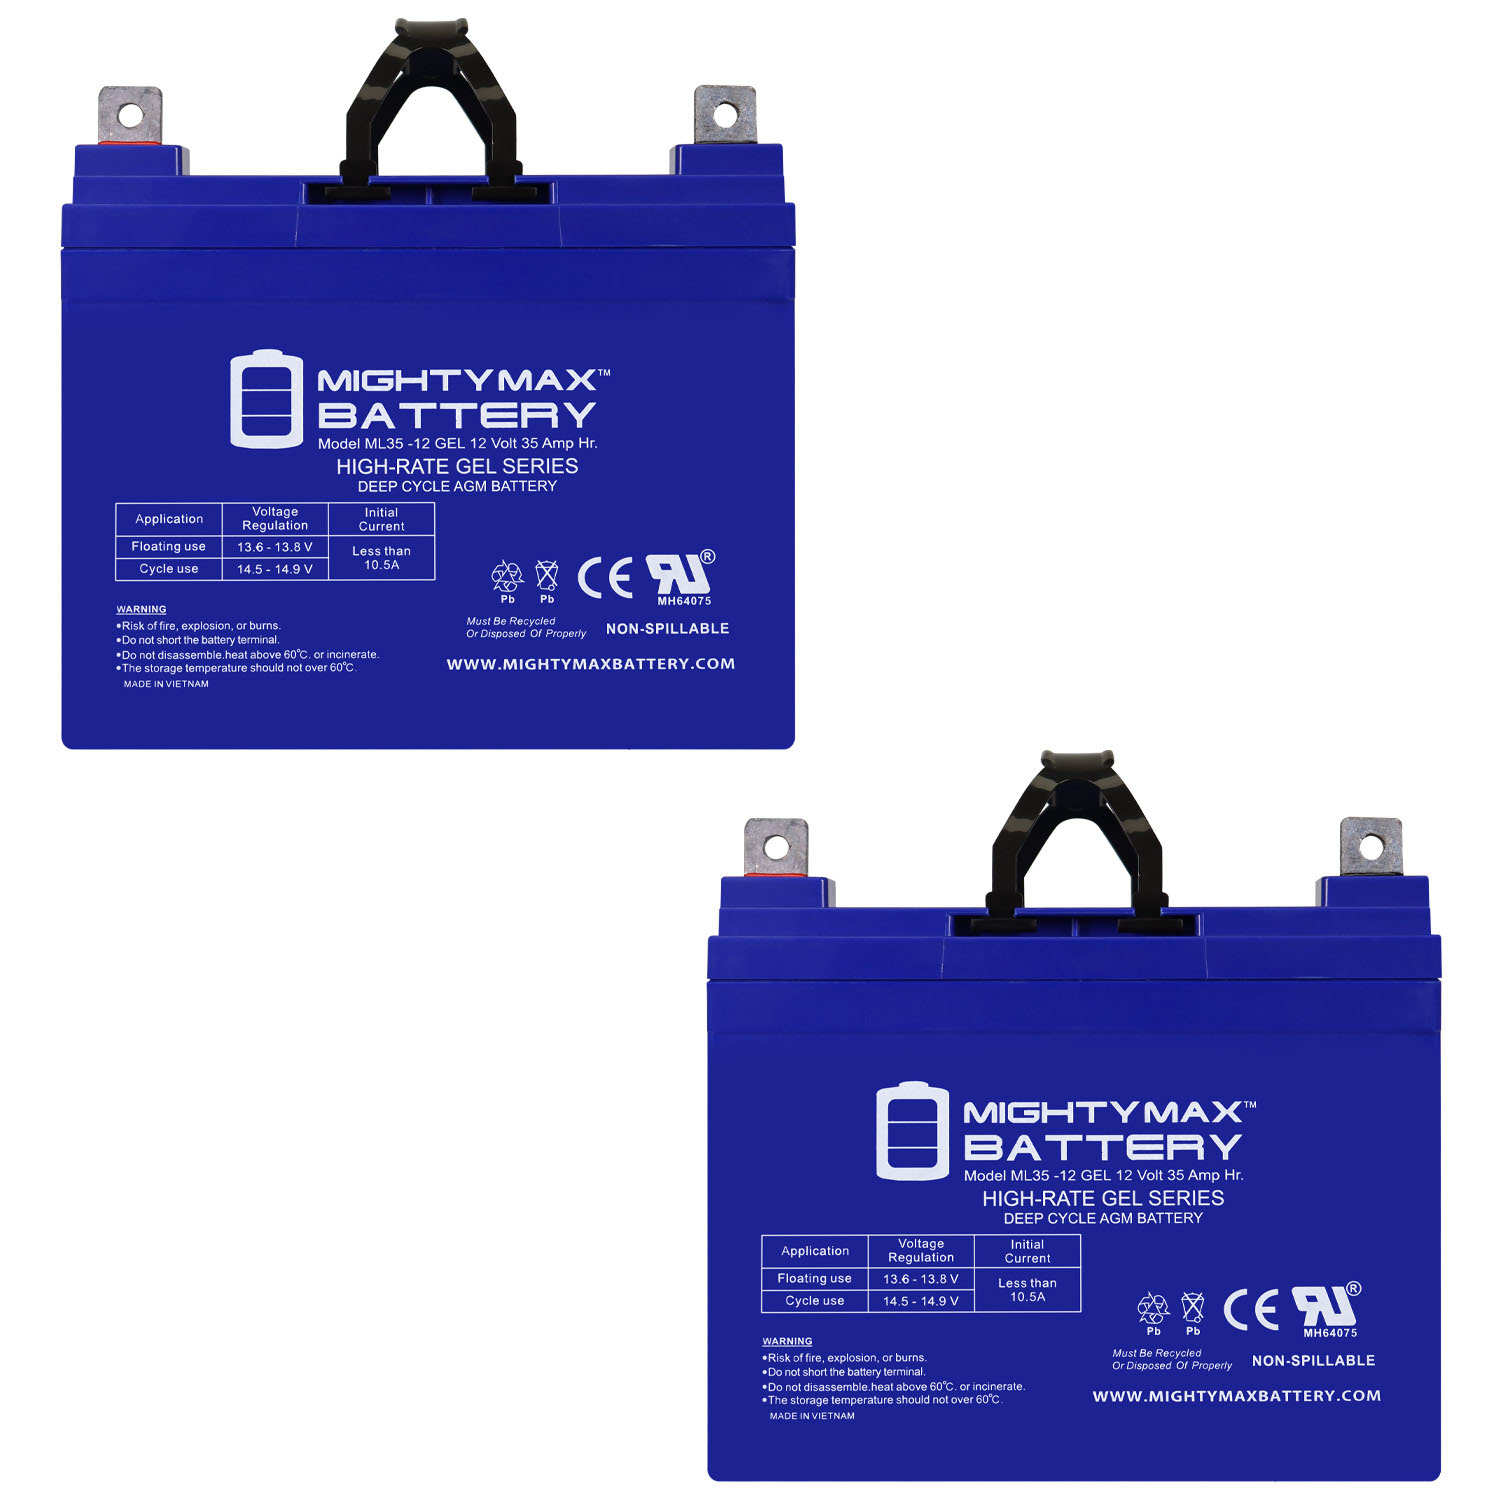 12V 35AH GEL NB Replacement Battery Compatible with Pride Mobility BATLIQ1017 - 2 Pack